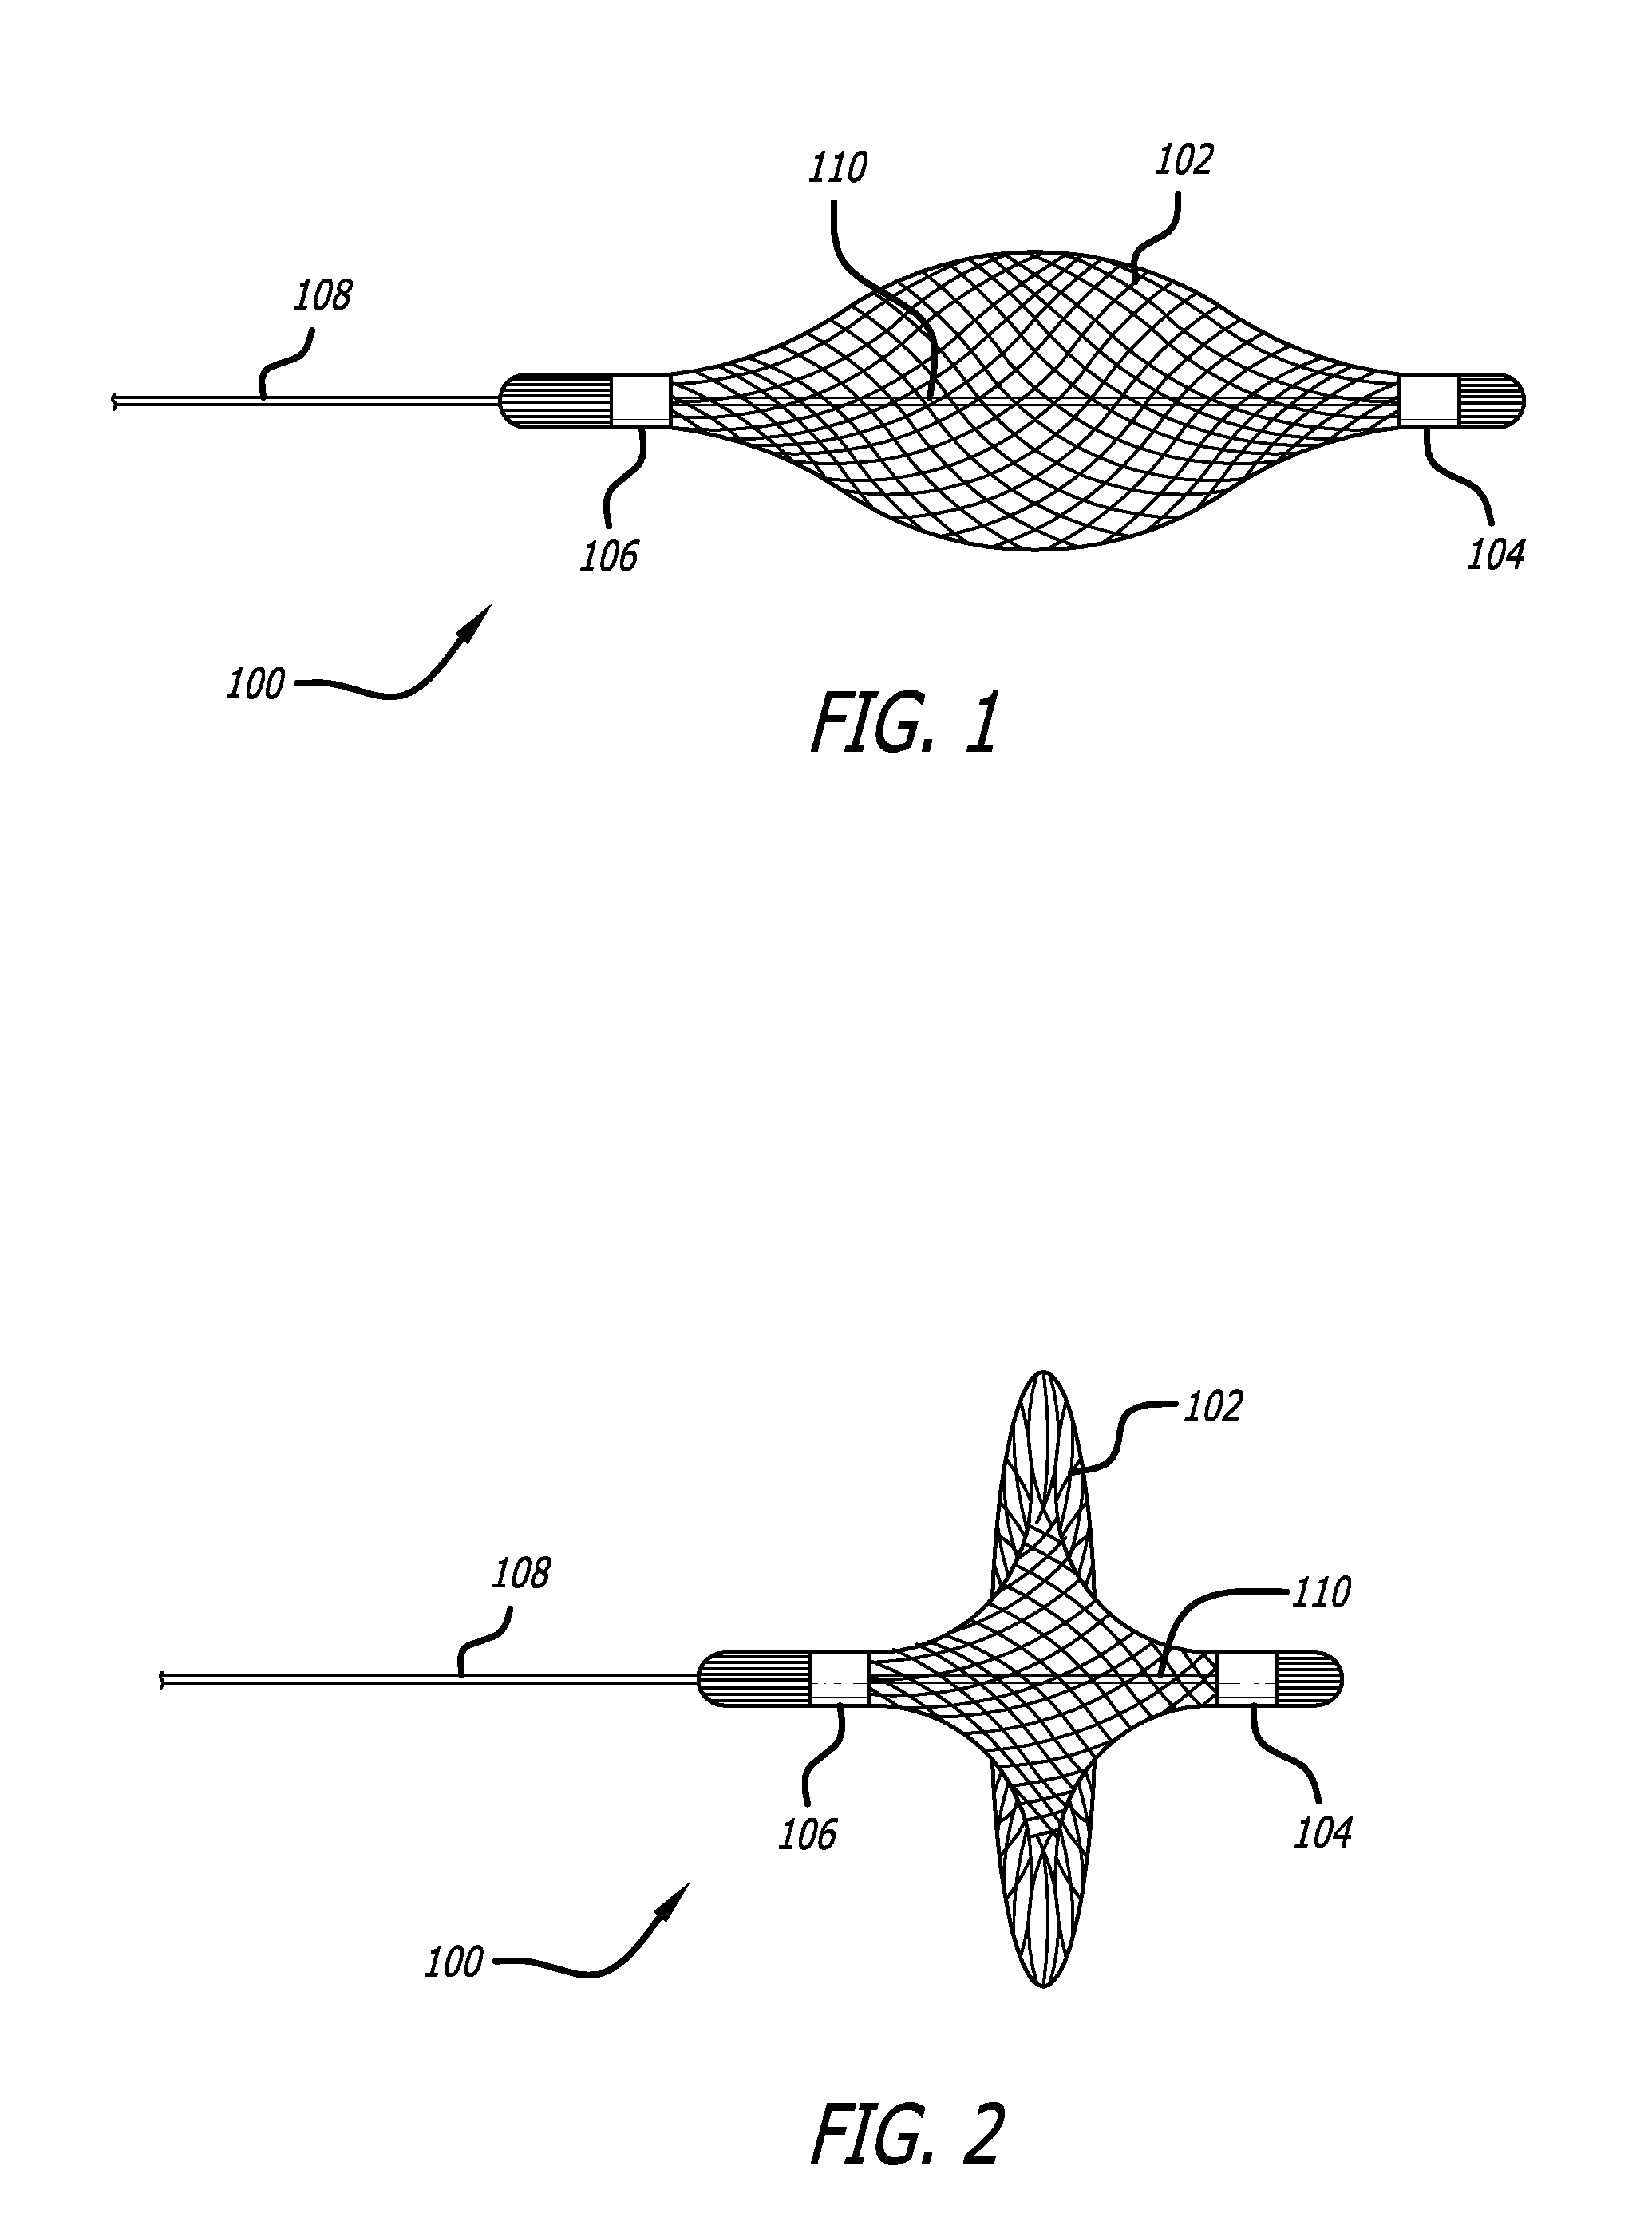 Delivery Tool For Percutaneous Delivery Of A Prosthesis